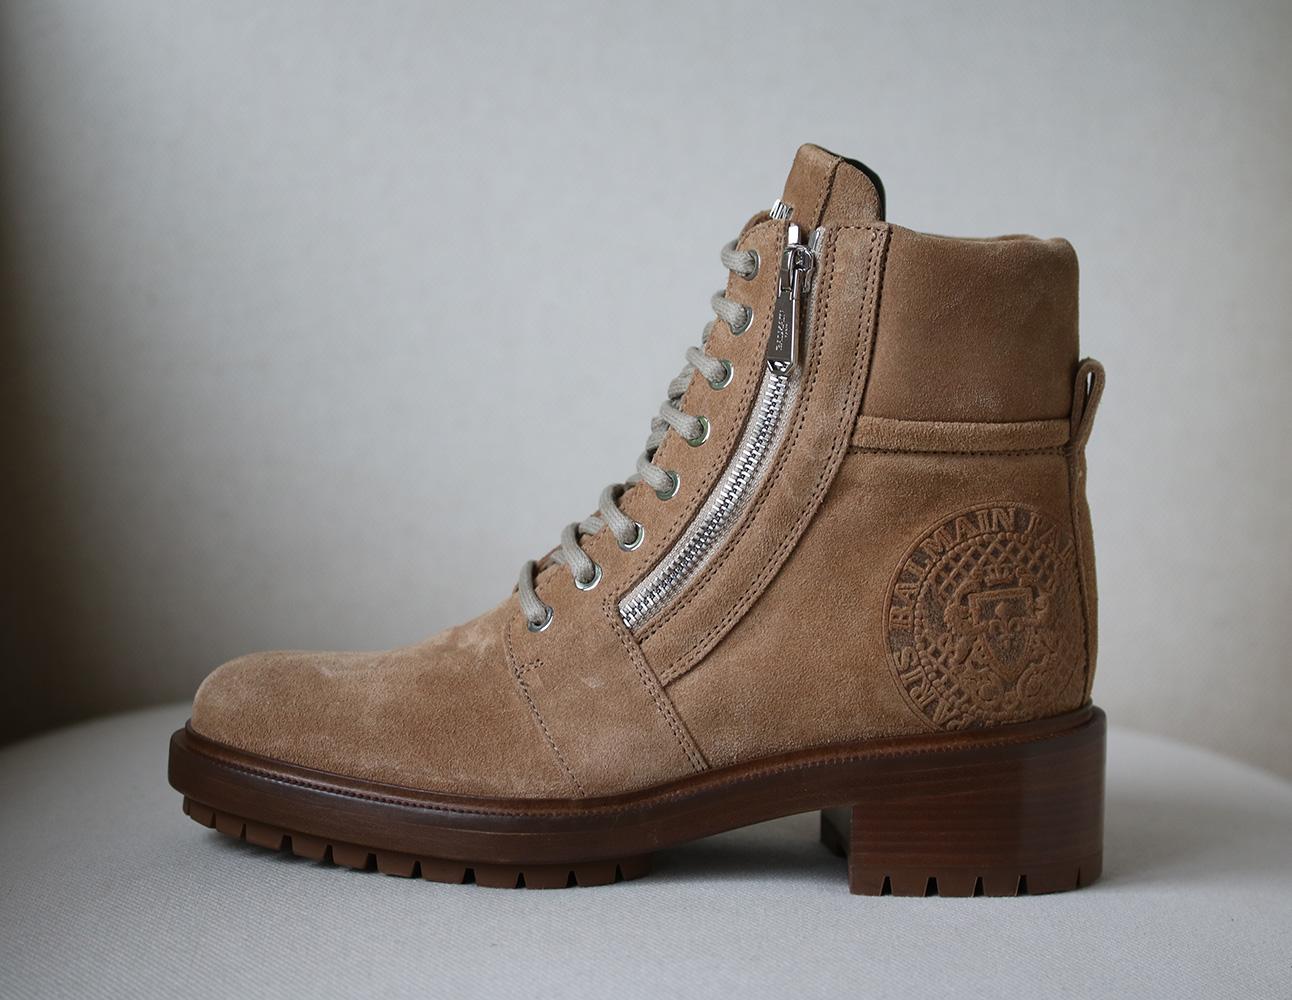 We love how Balmain incorporates the label's iconic medallion emblem throughout its spring collection - on these 'Ranger' boots, it's been subtly embossed at the back. This pair has been been crafted in Italy from beige suede and is detailed with